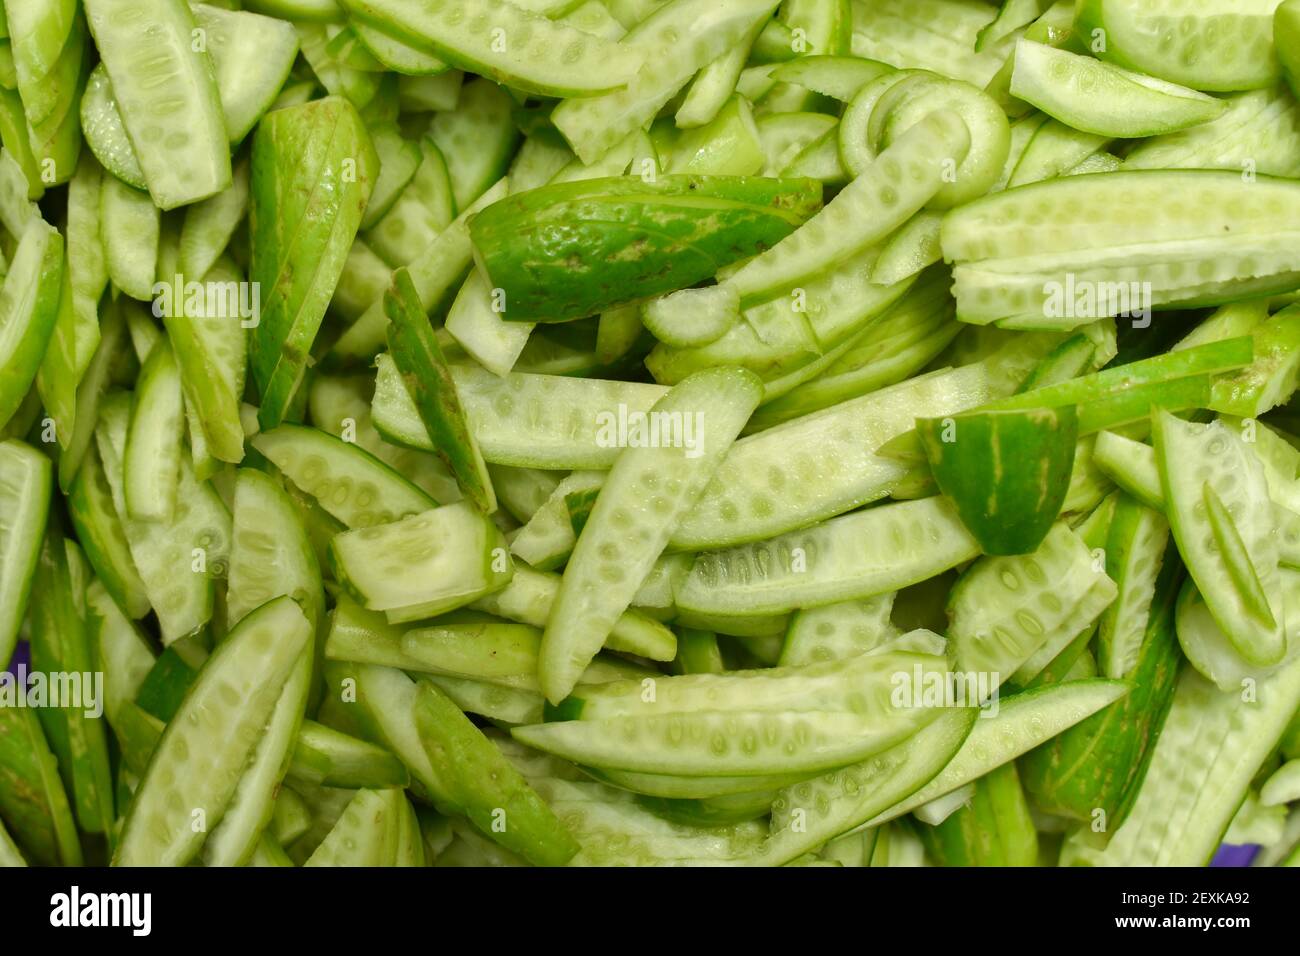 Coccinia grandis, ivy gourd known as scarlet gourd, Indian tindora, tindi, tendli and kowai fruit. Sliced, Diced and heap Stock Photo